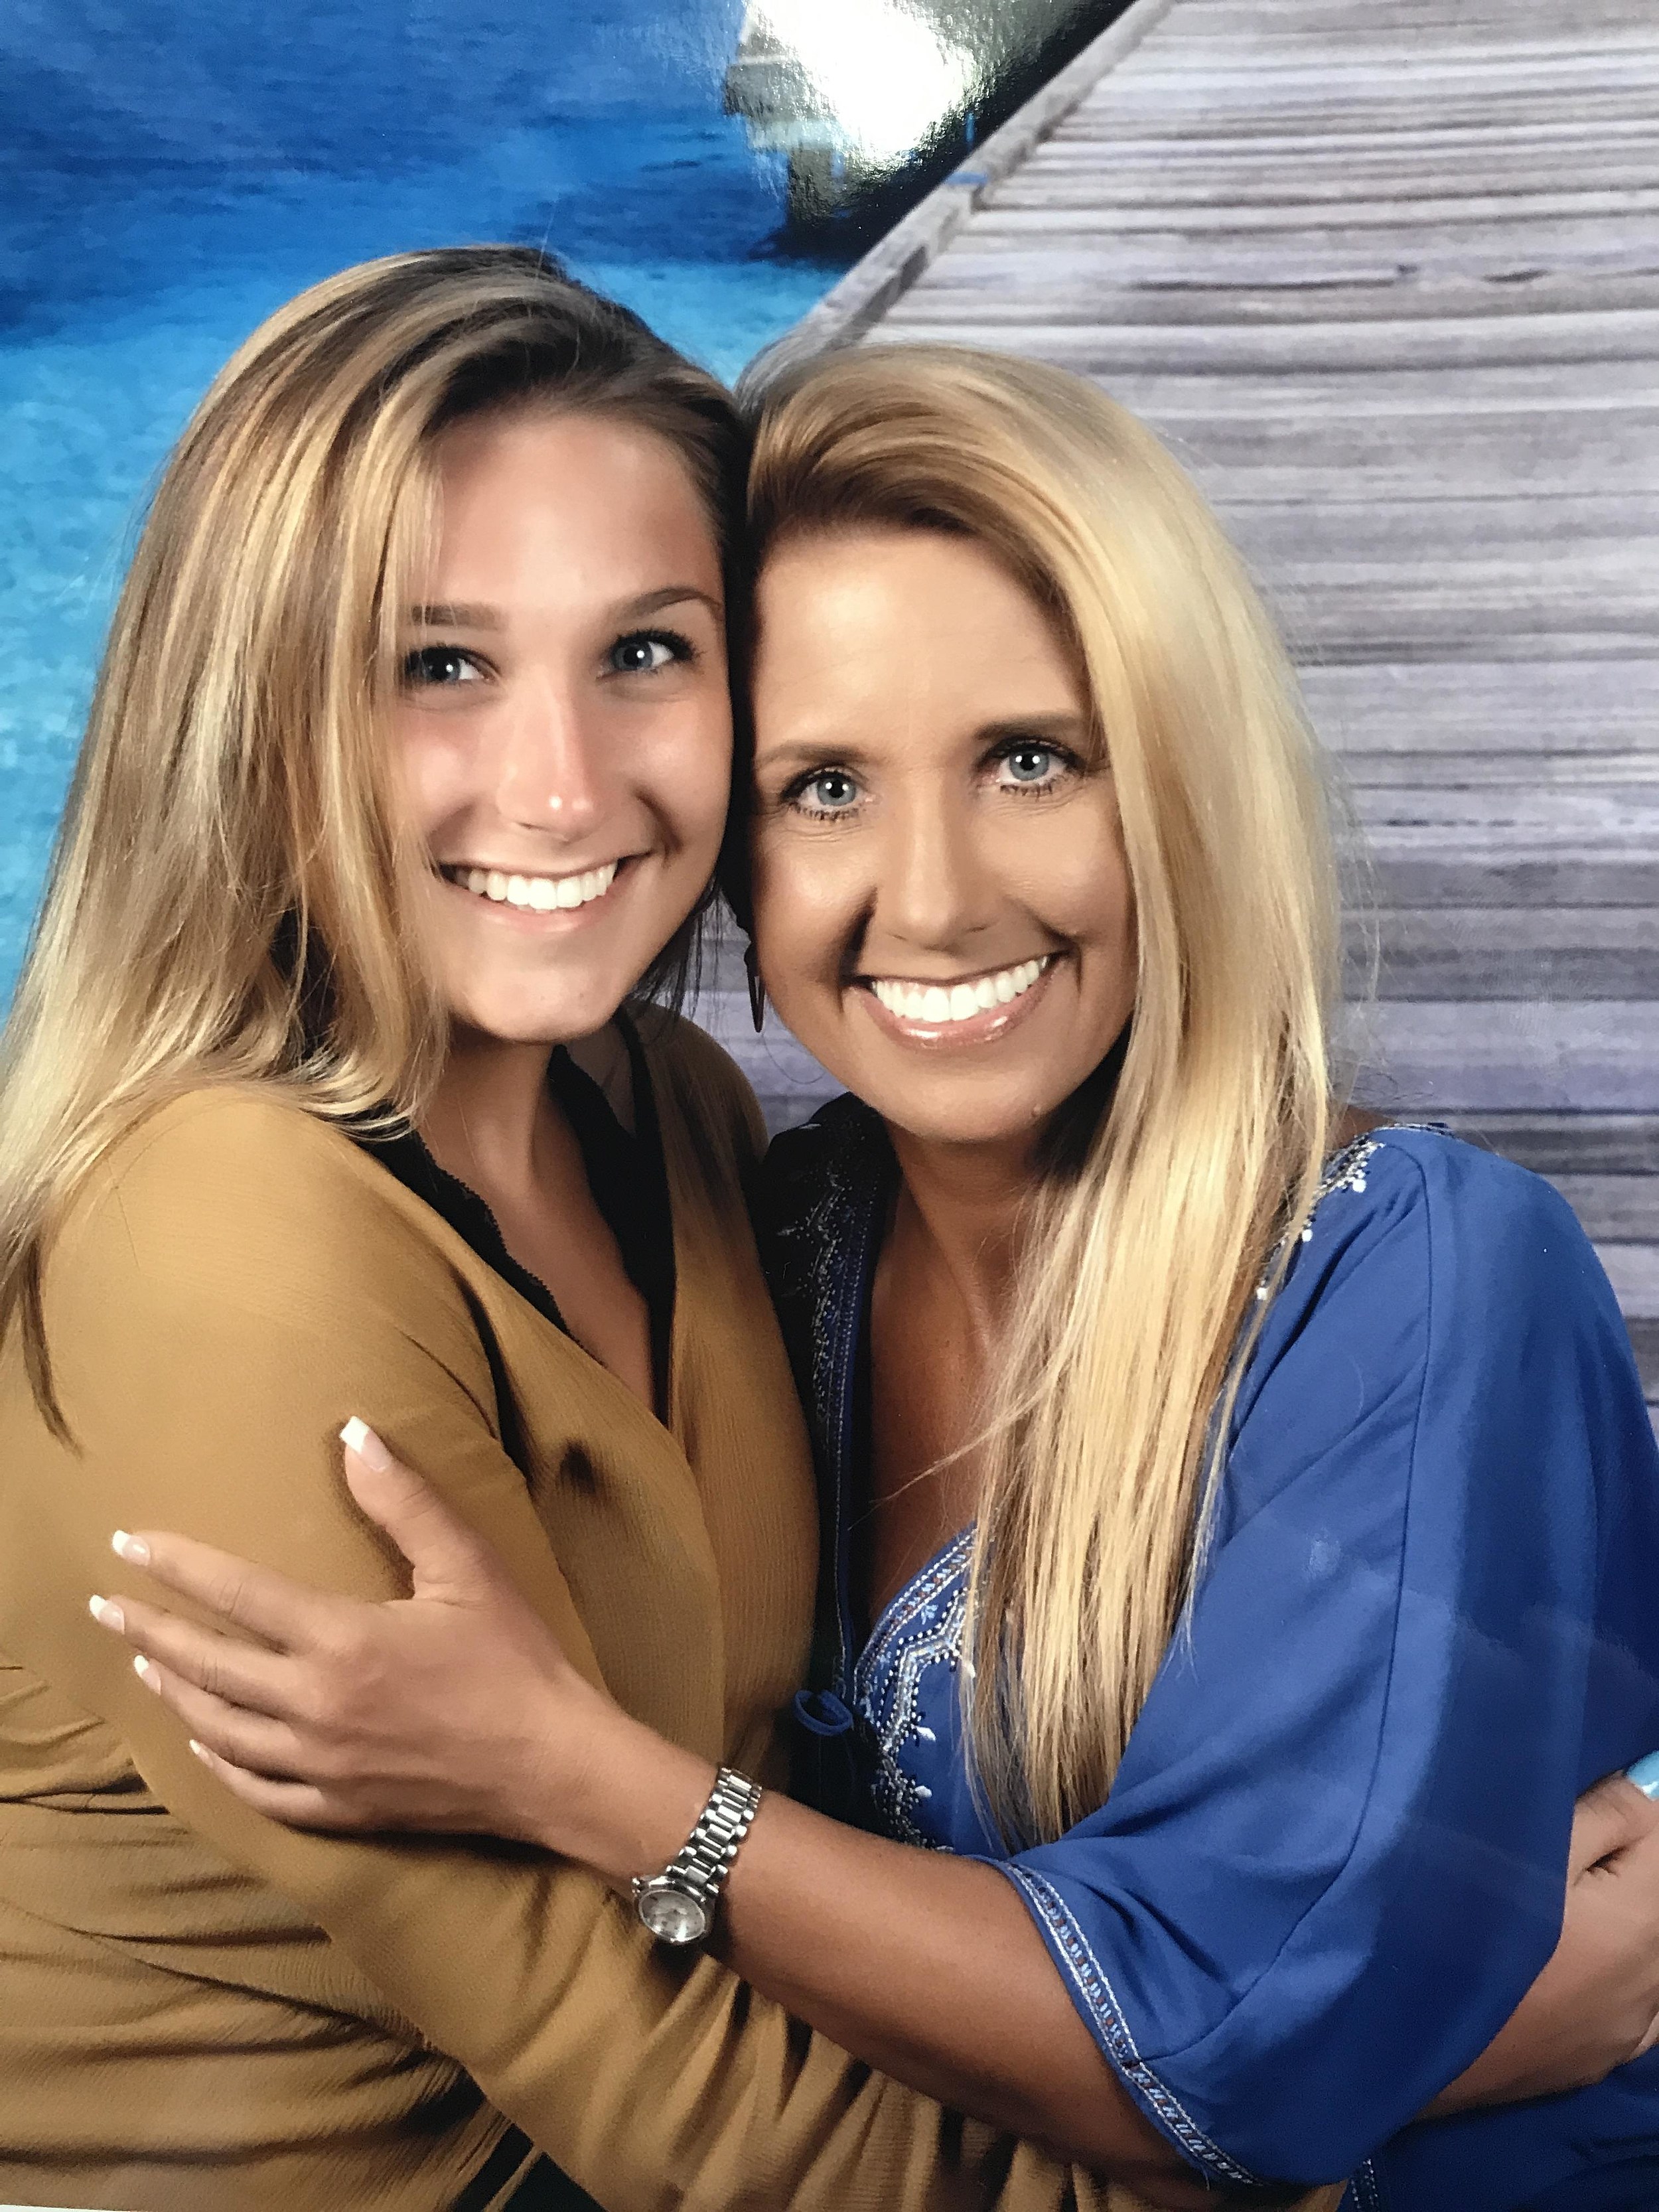 GNA Mother Daughter LookAlike Contest [VOTING]